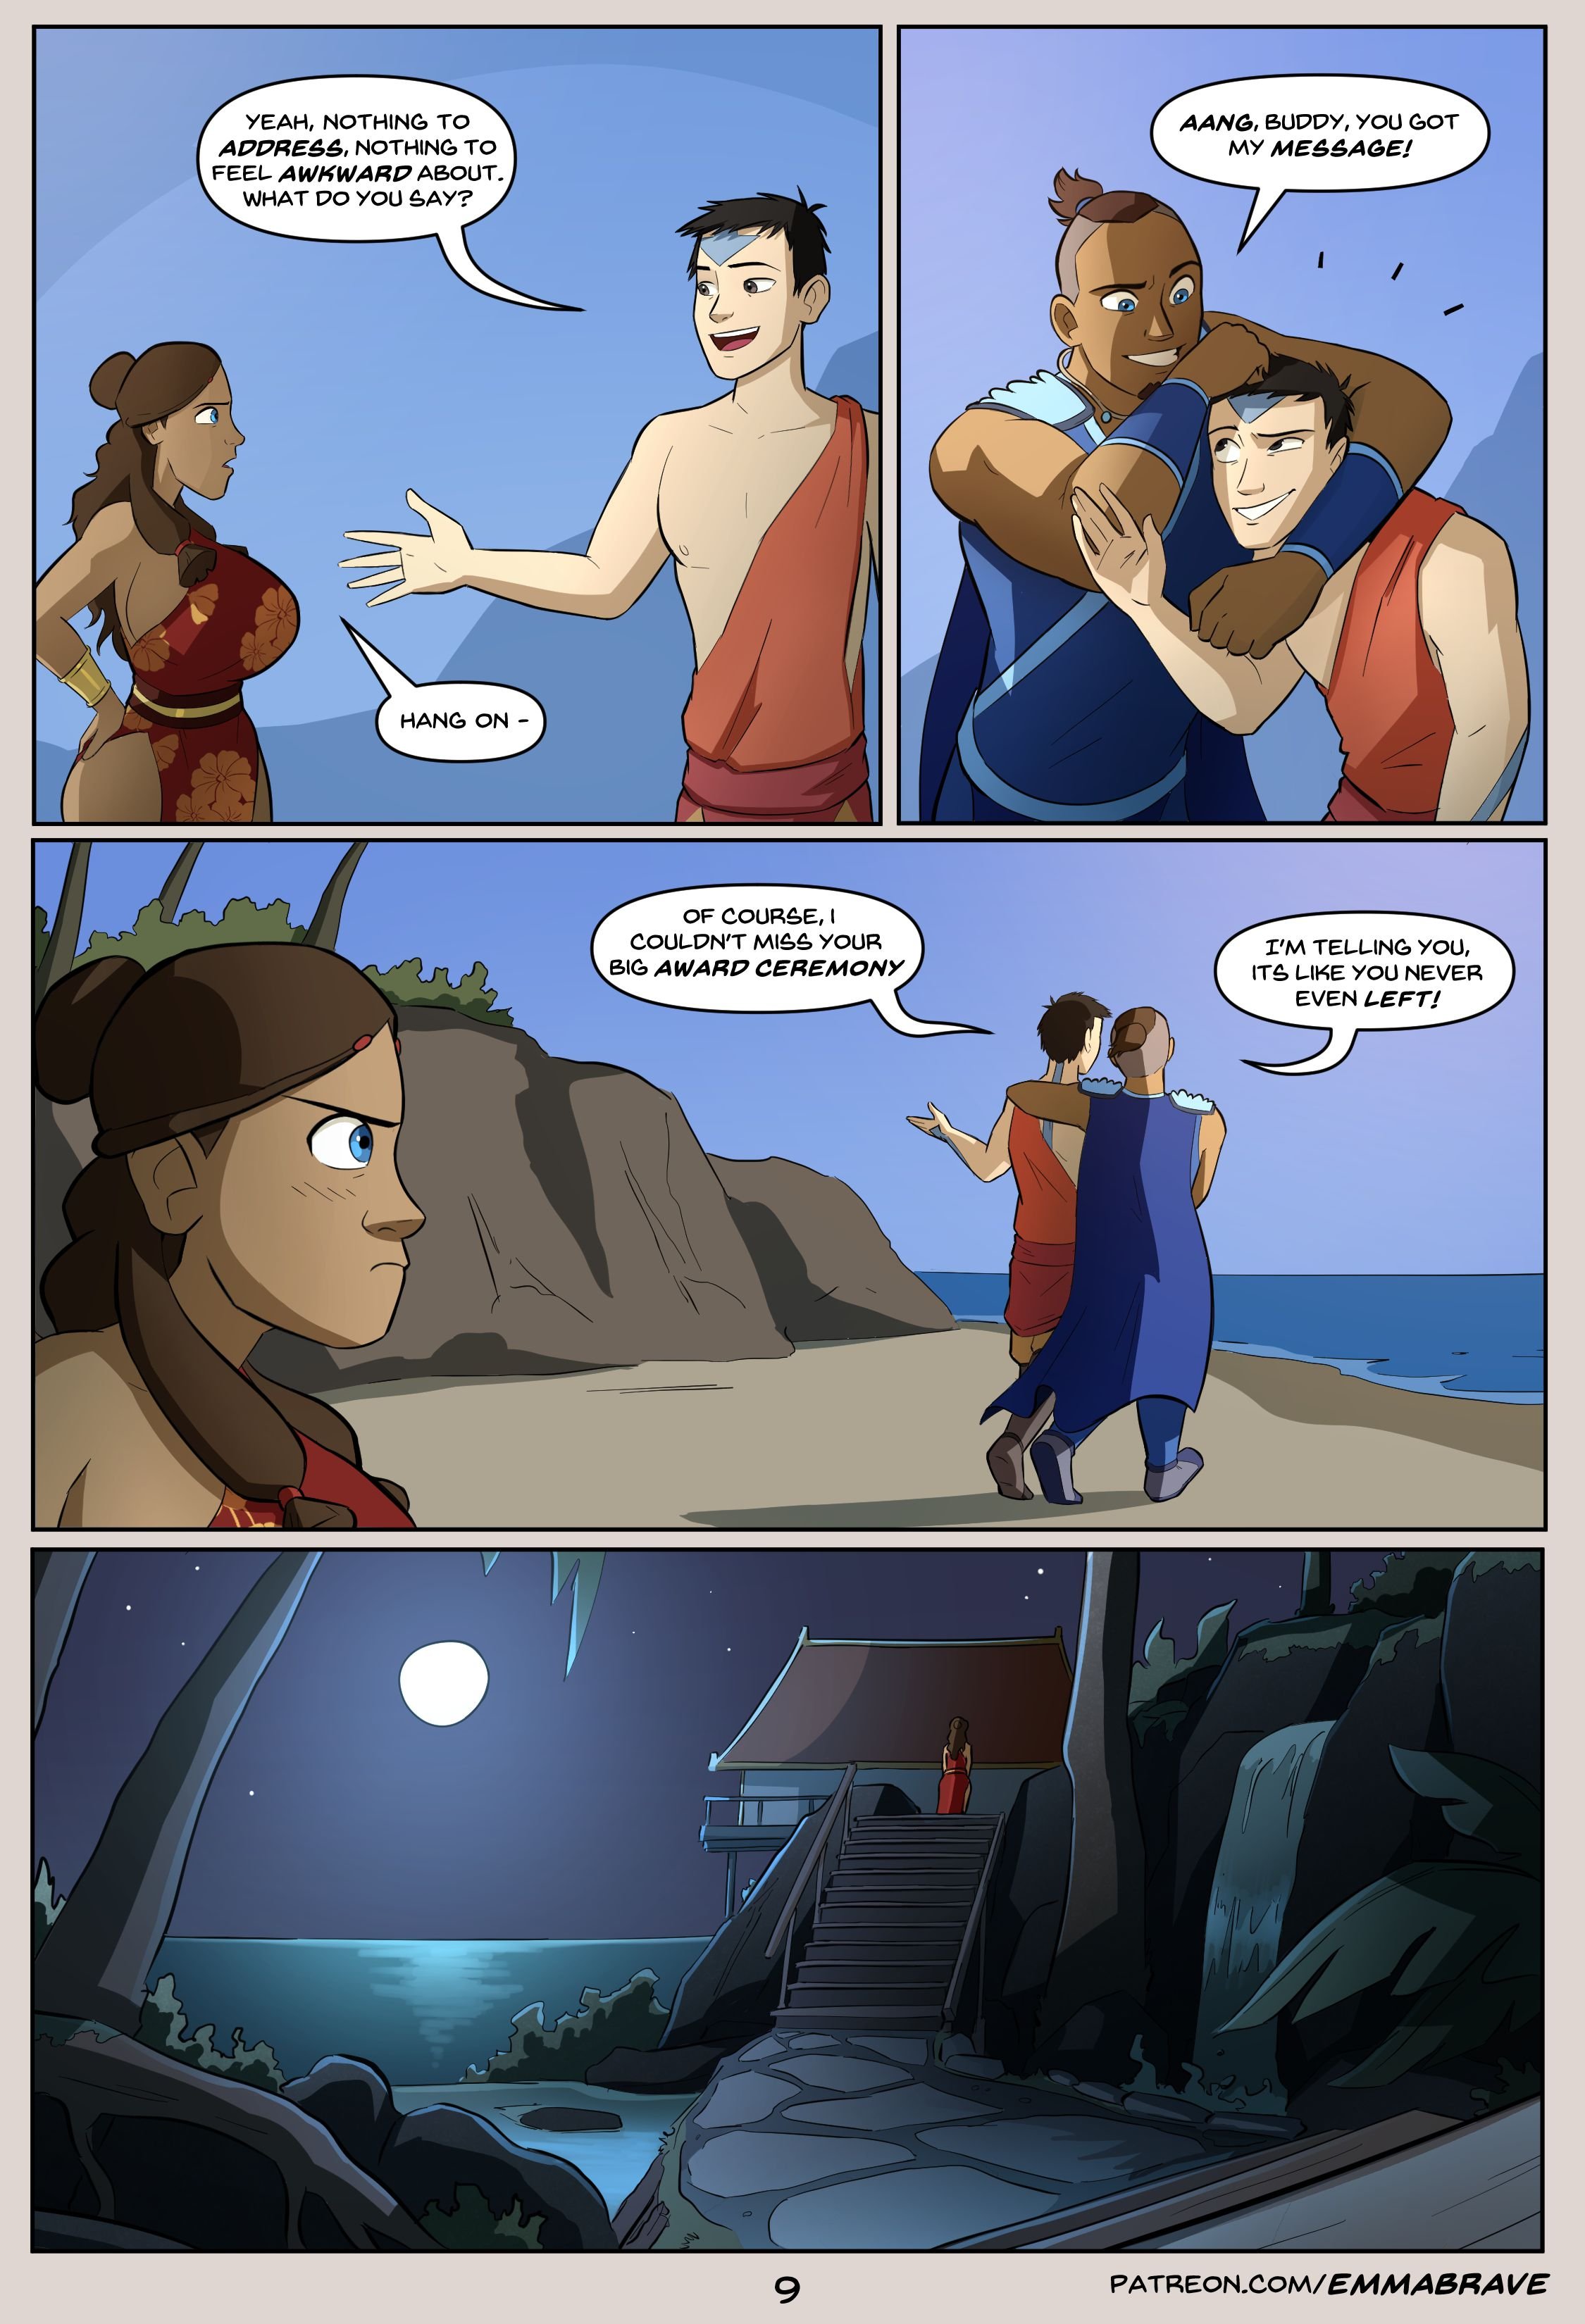 Aang Gay Porn - After Avatar (Avatar: The Last Airbender) [EmmaBrave] - 4 . After Avatar -  Chapter 4 (Avatar: The Last Airbender) [EmmaBrave] - AllPornComic